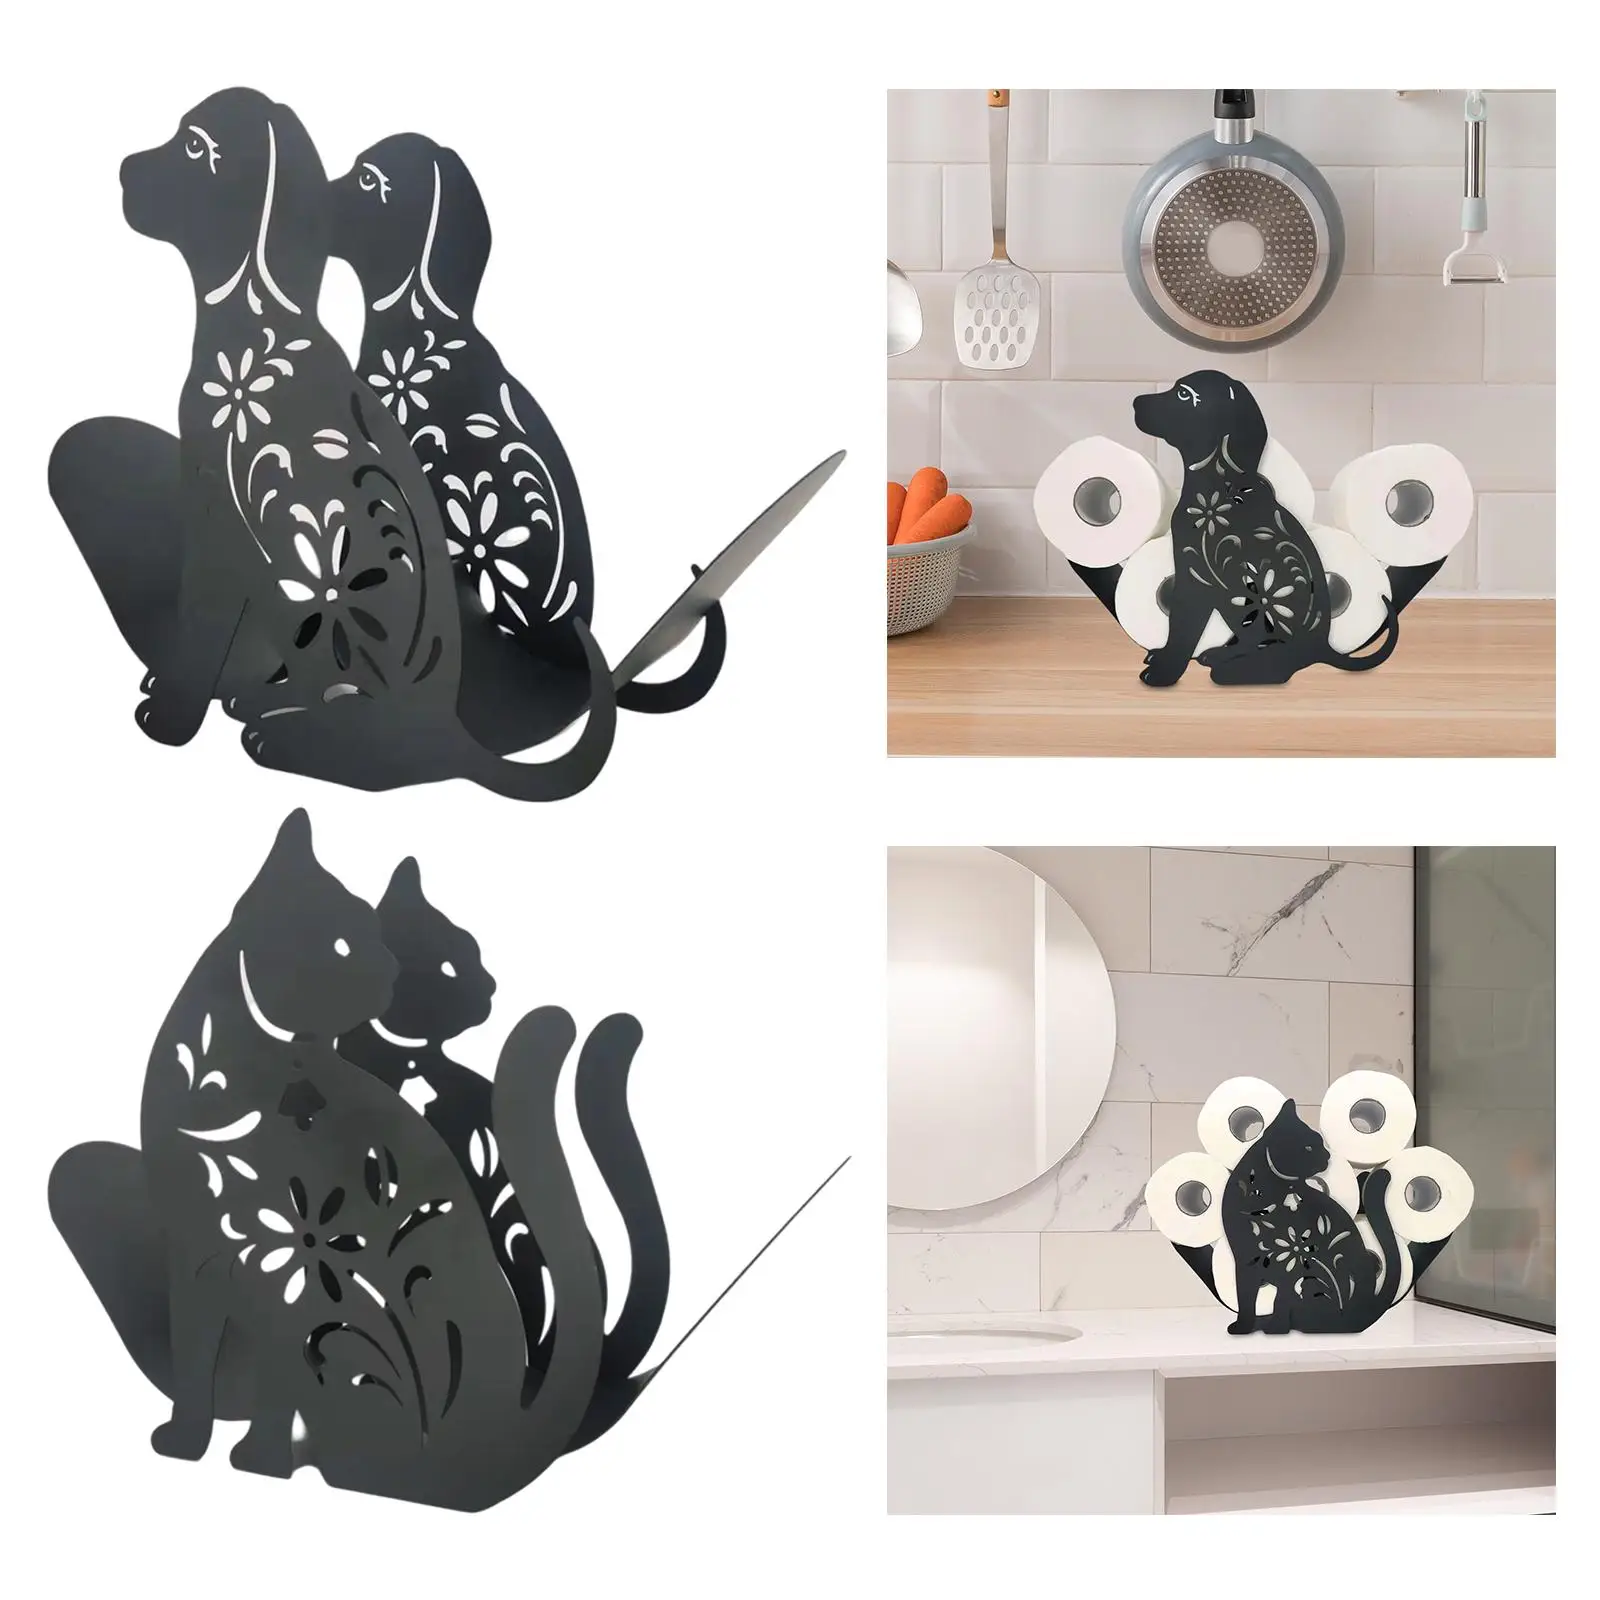 Creative  Holder, Bathroom Tissue Storage Iron Hollow Out Animals Model Roll Paper Rack for Home Washroom Crafts Decoration